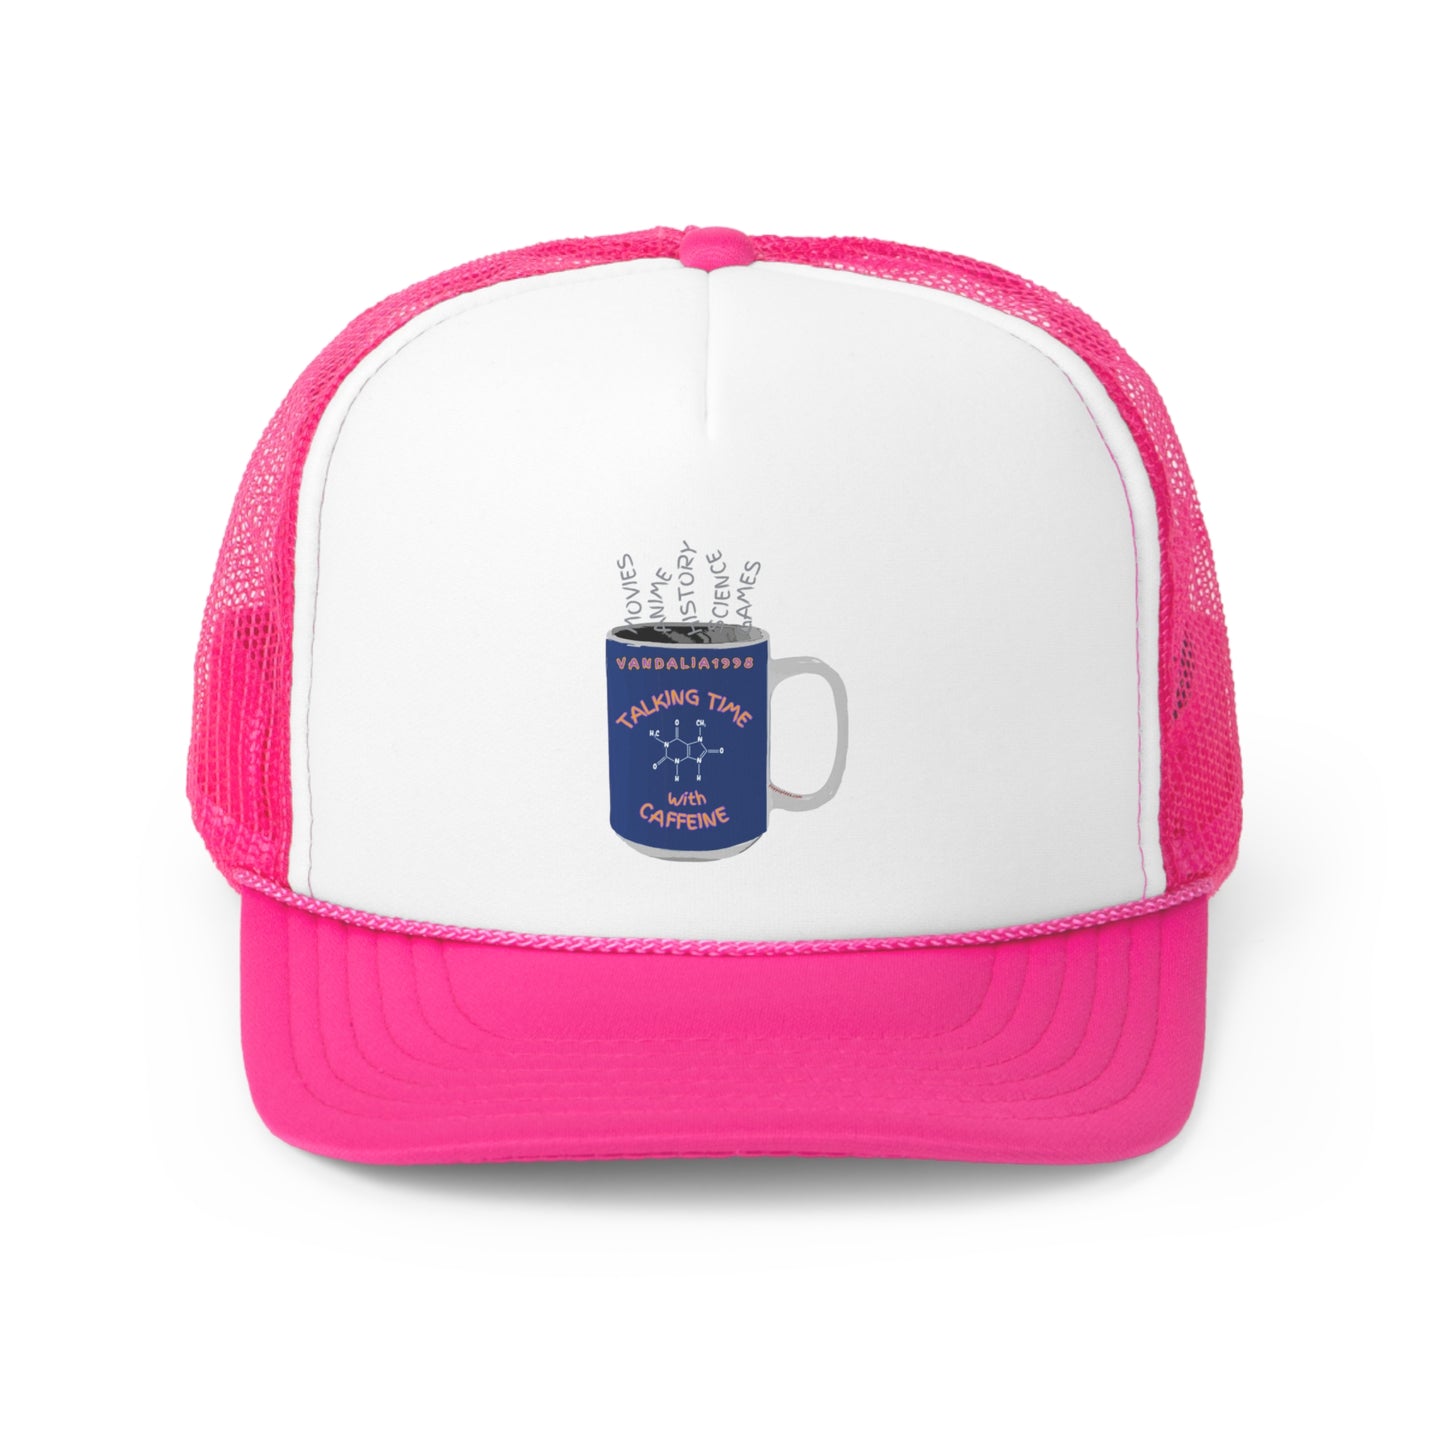 Talking Time With Caffeine Trucker Caps